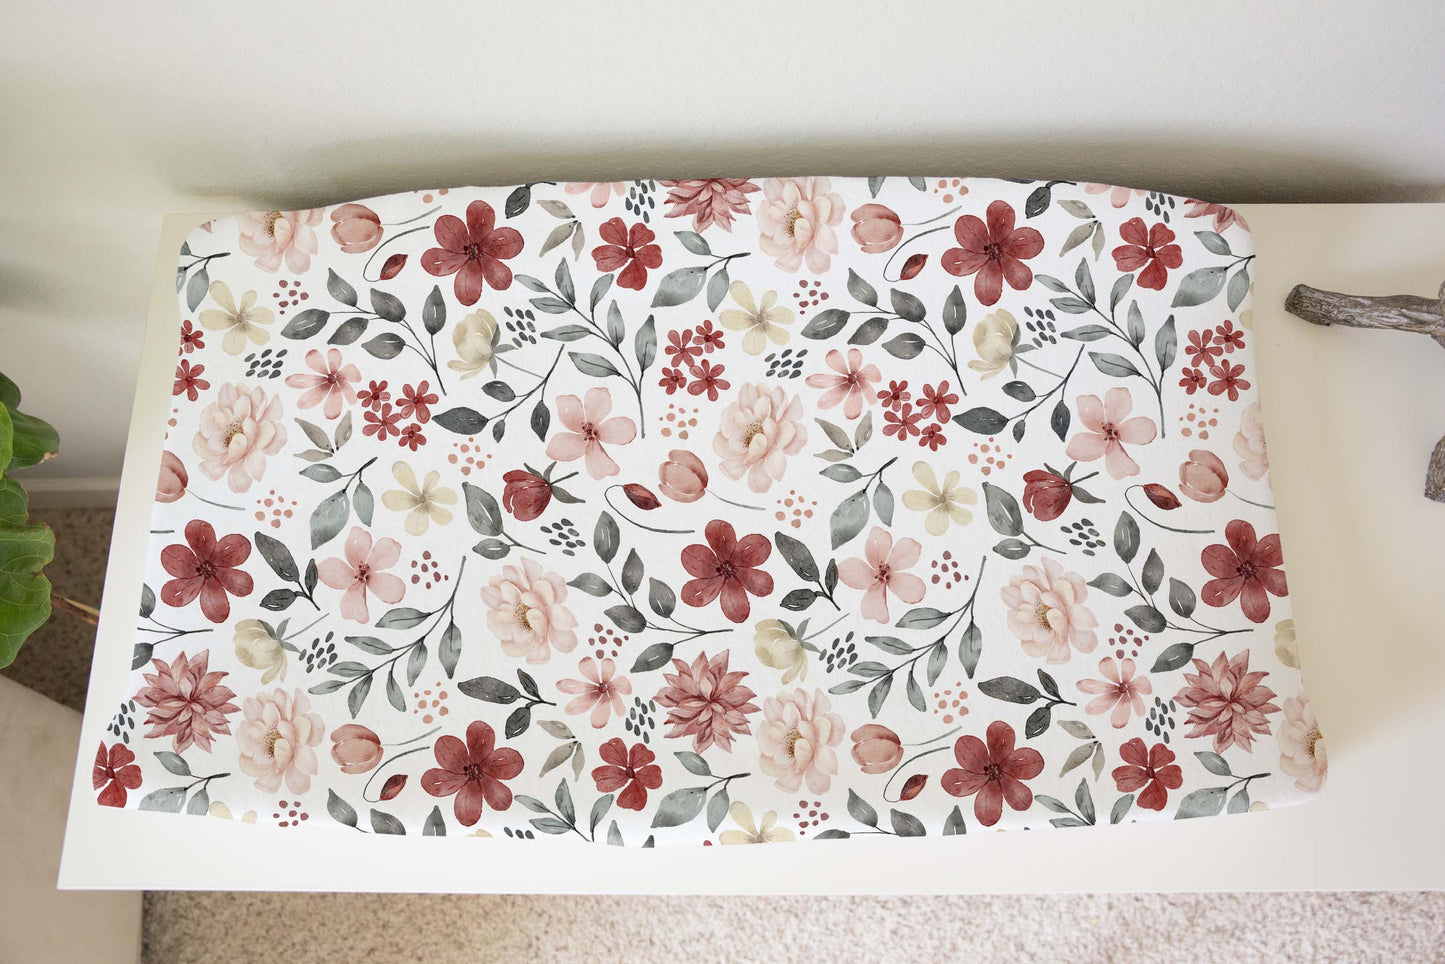 Peony changing pad cover, Floral nursery decor - Peonies garden